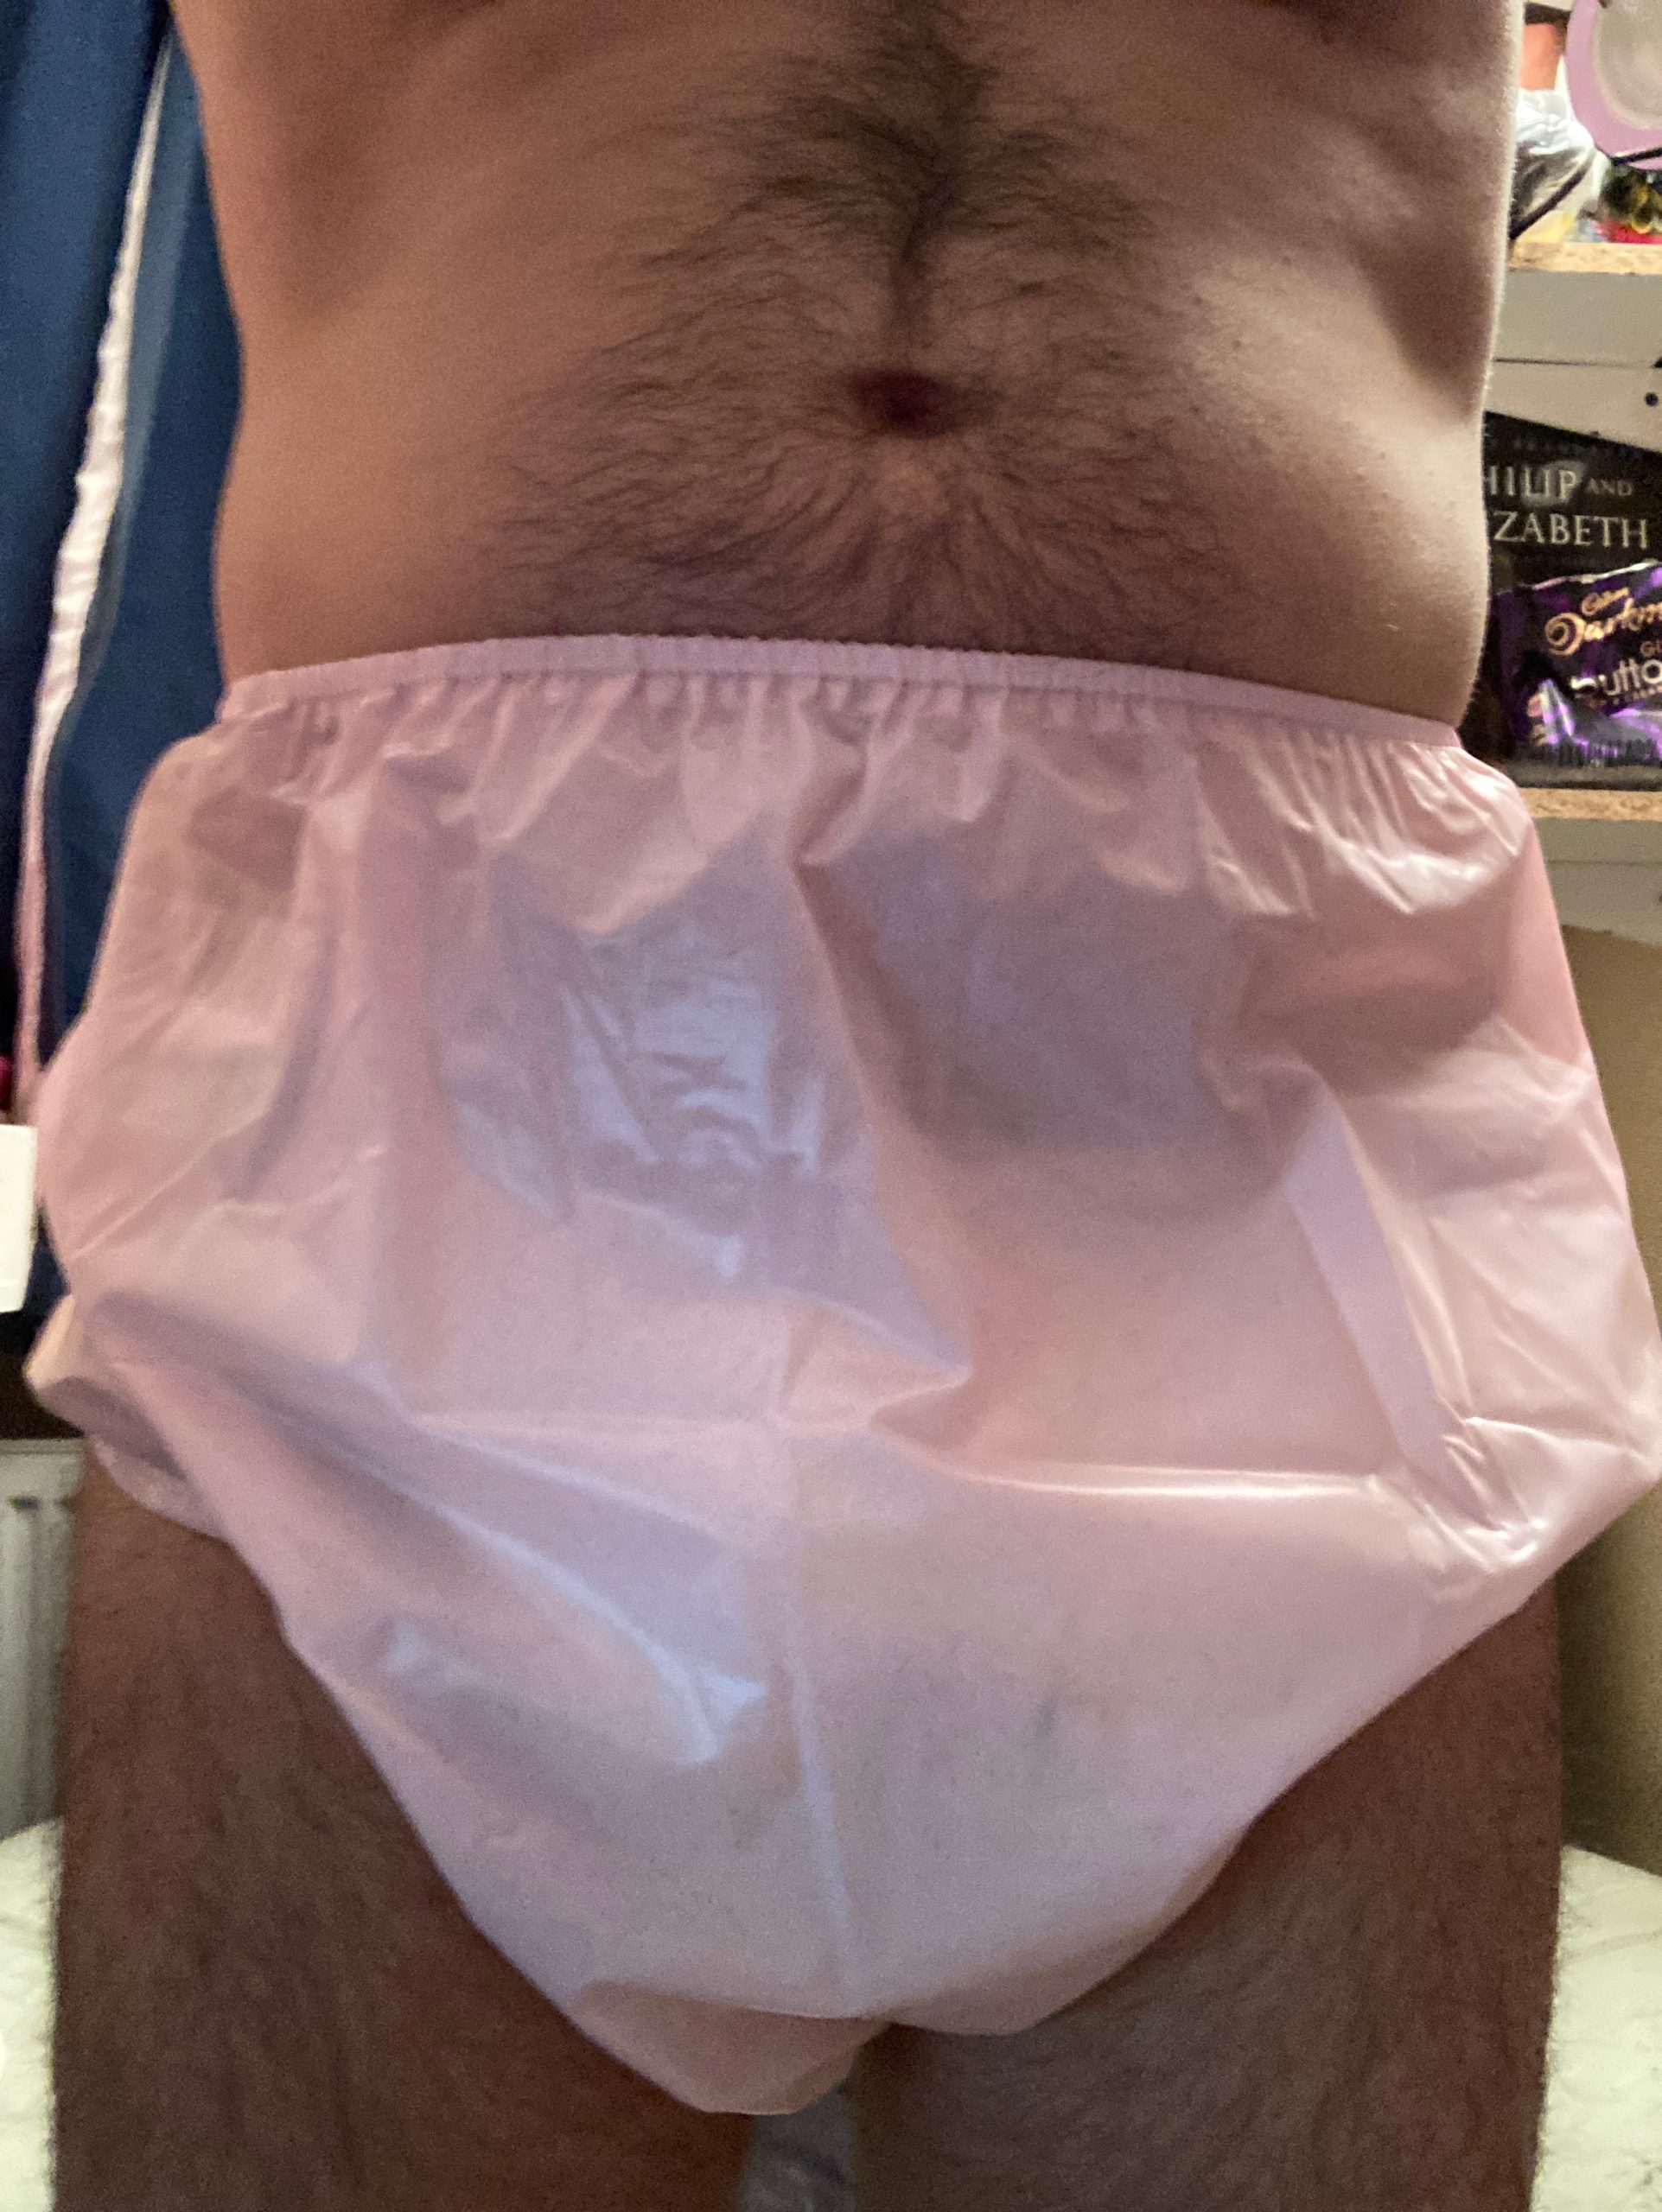 Bedwetting sissy cocksucker needs humiliation